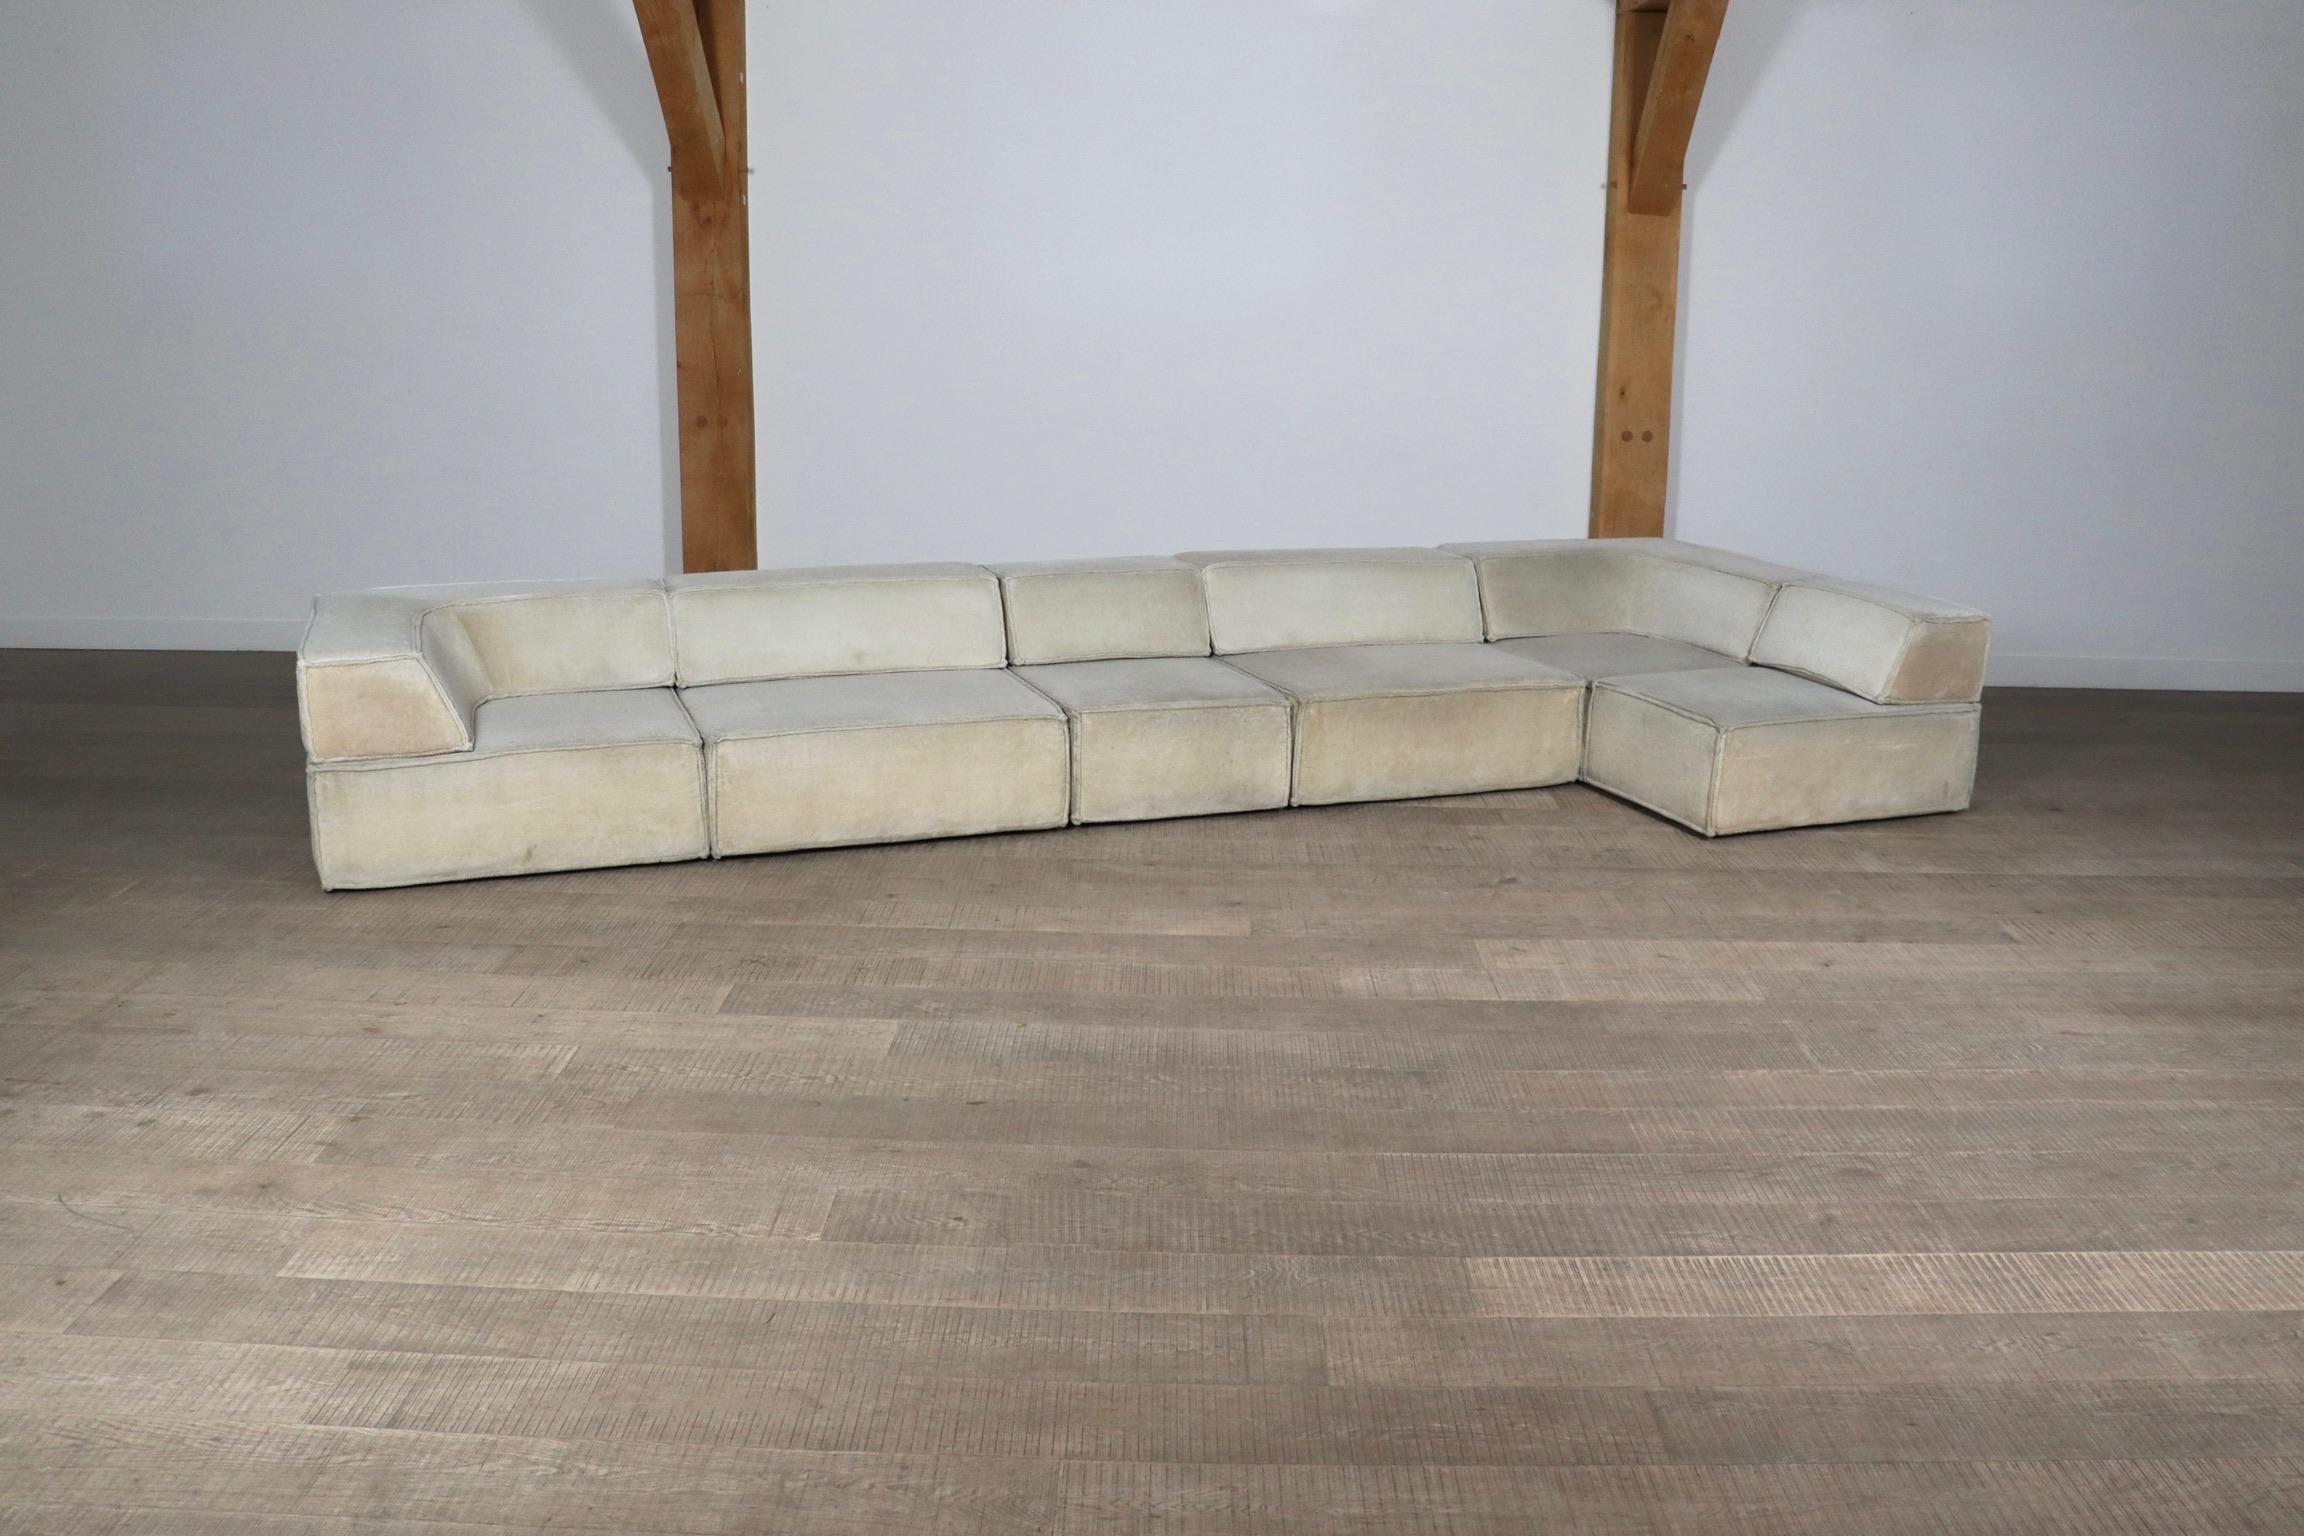 The iconic modular sofa COR trio, executed in the original light beige teddy fabric. The Cor Trio design was created in 1972 by Team Form AG in Switzerland for COR, and is still popular today due to its timeless design and high comfort.

This sofa